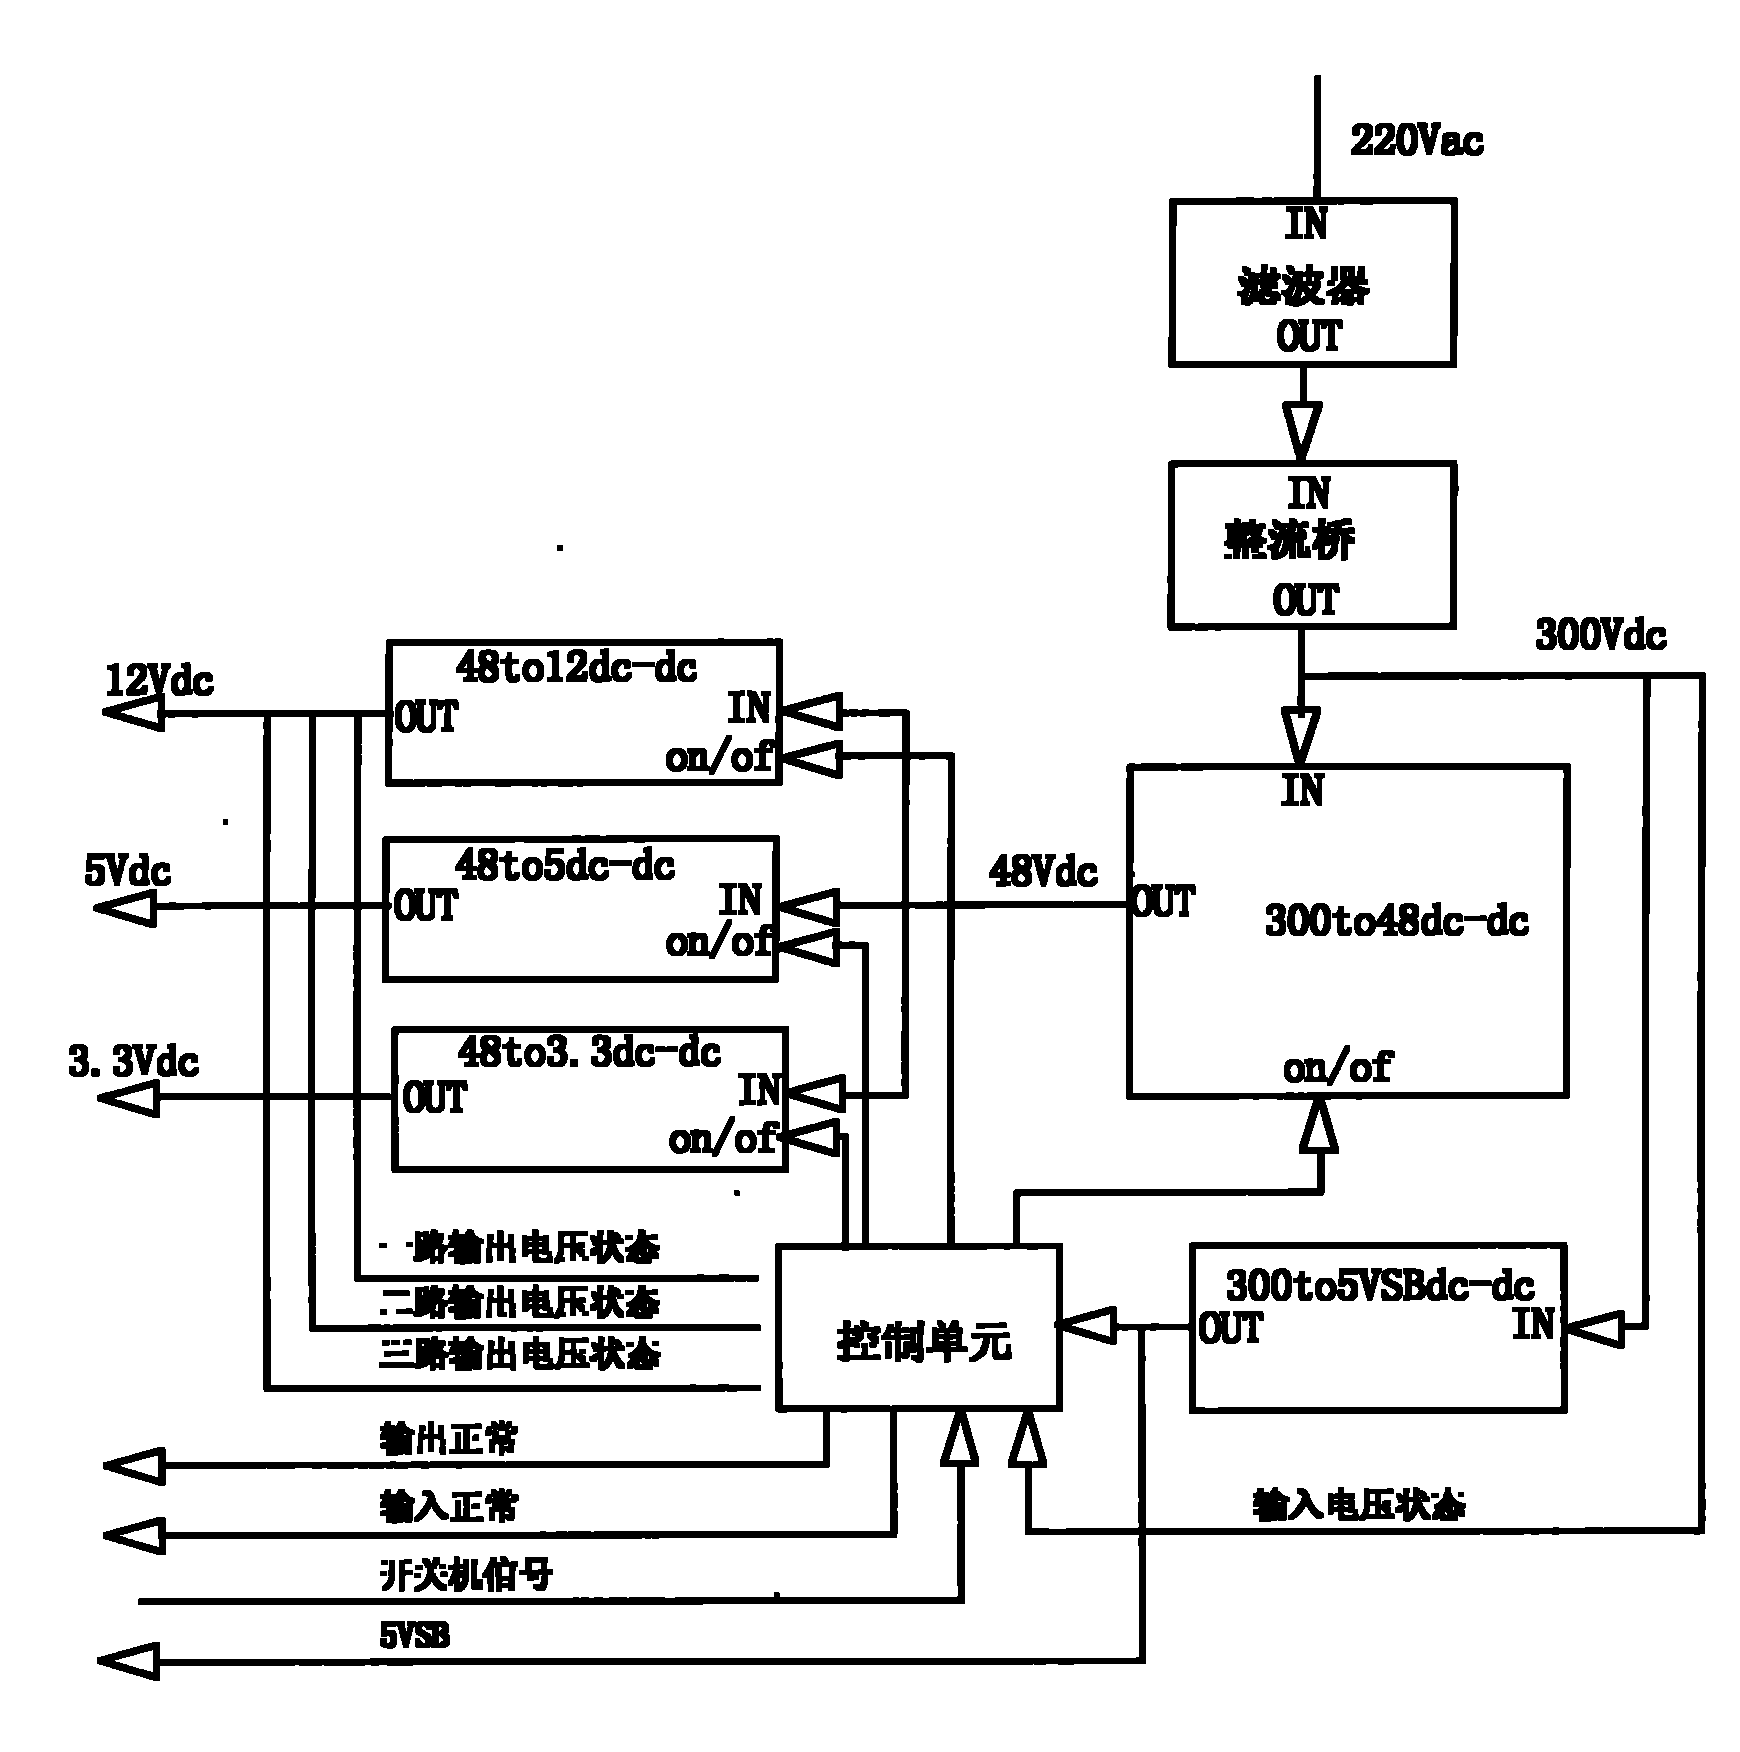 Method for designing high-power and high-reliability server power supply by using modular power supply